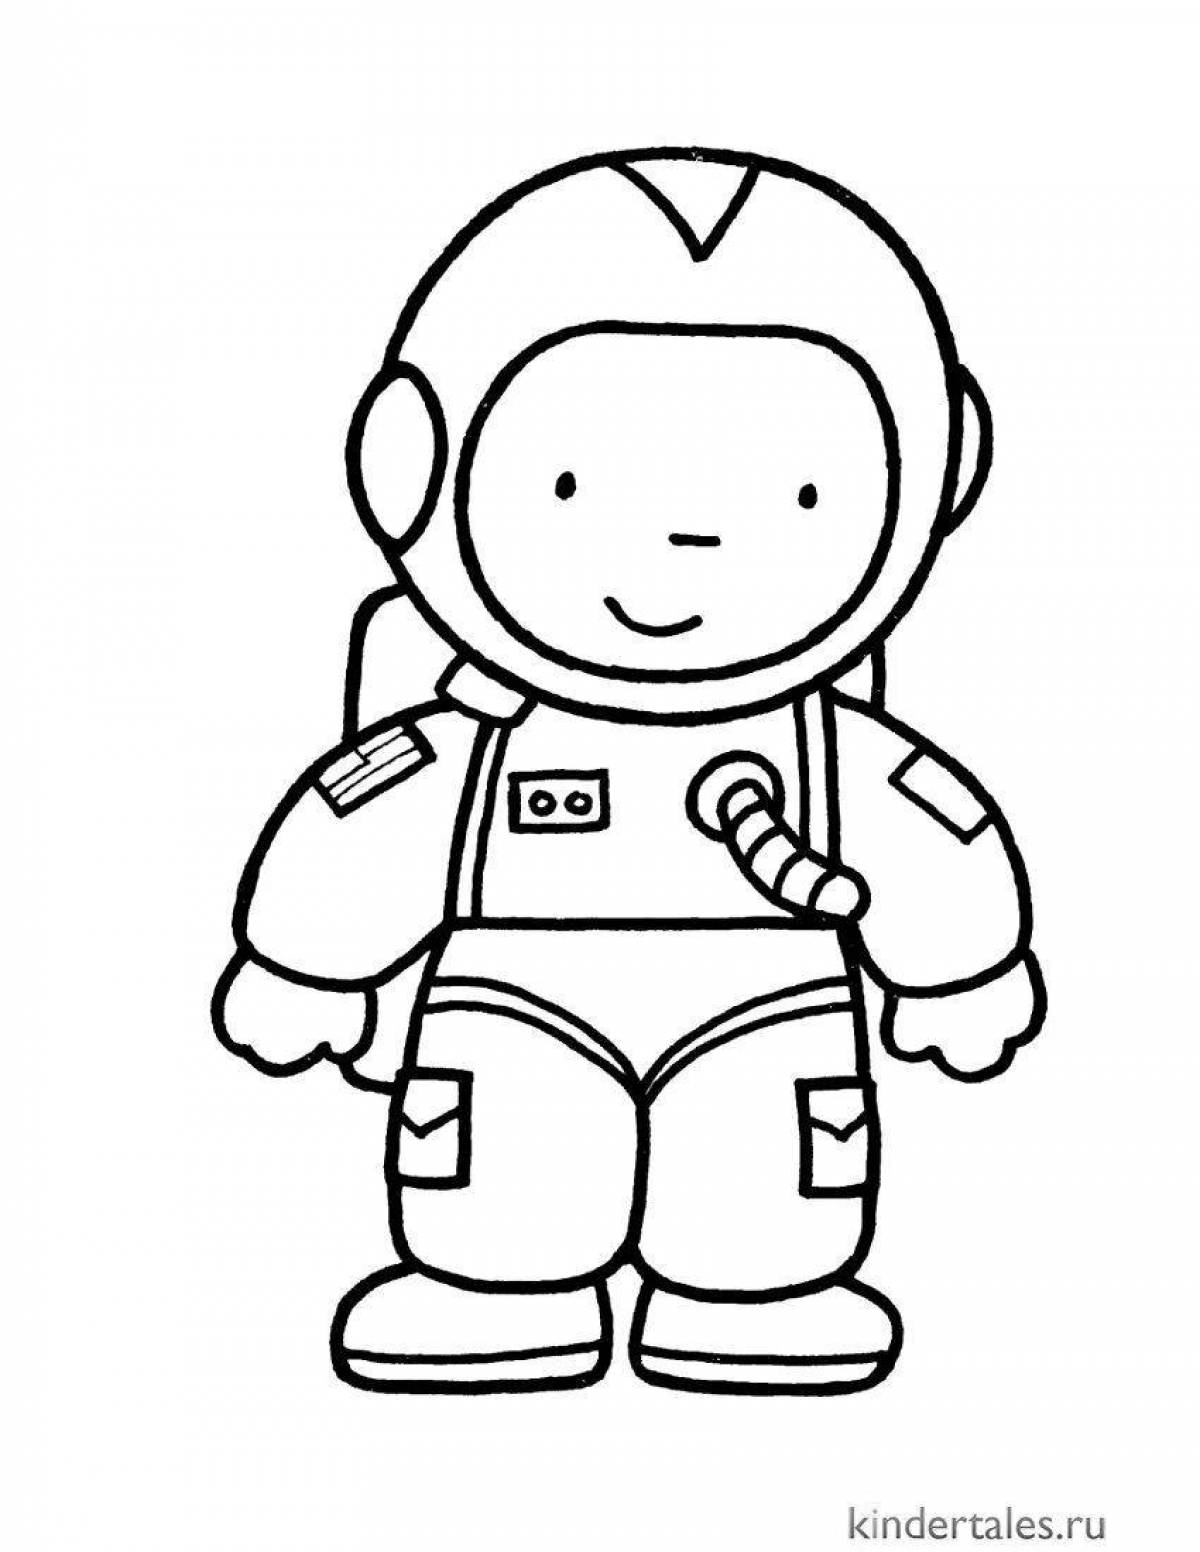 Playful astronaut coloring page for kids